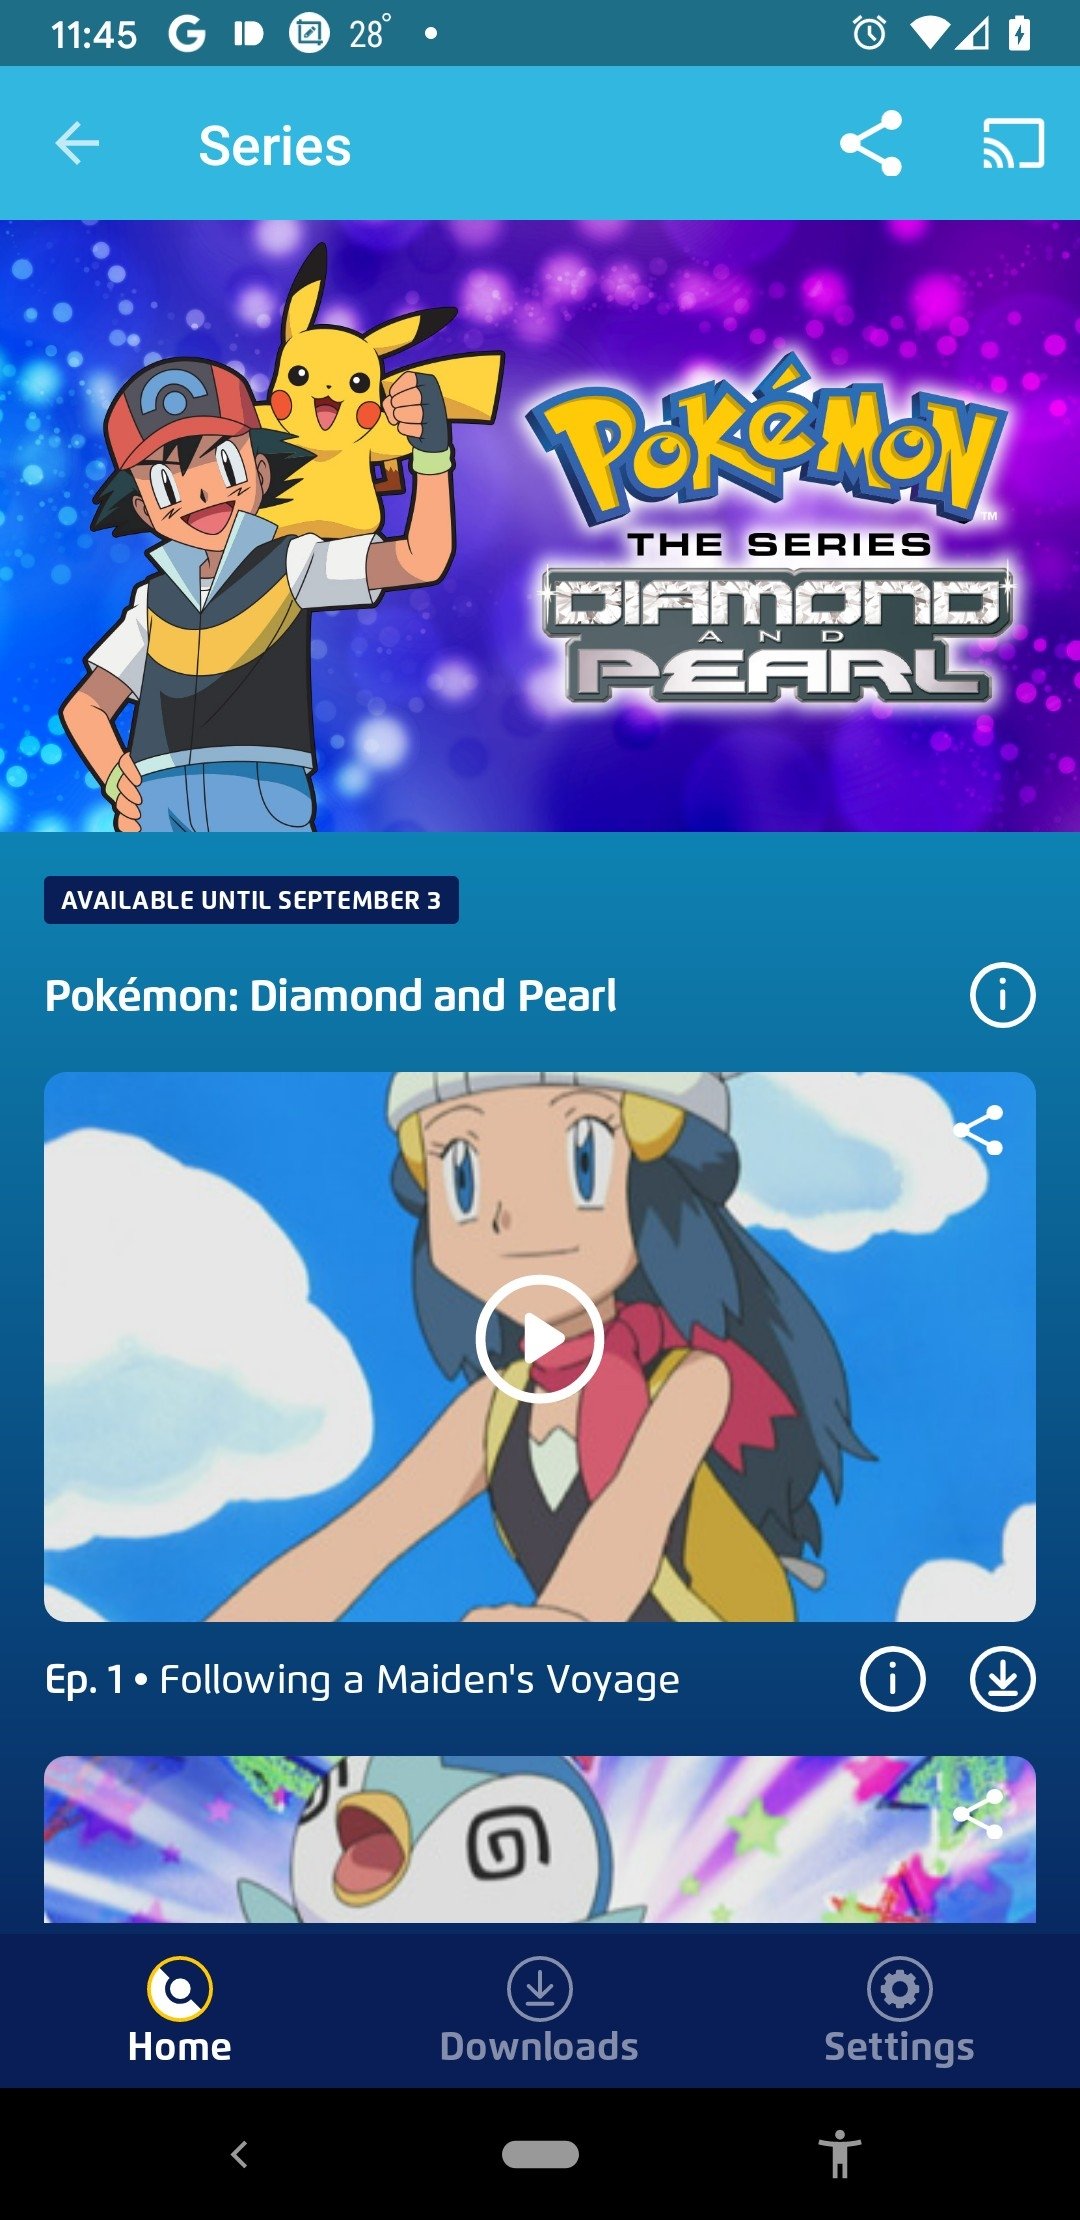 Pokémon TV APK for Android - Download